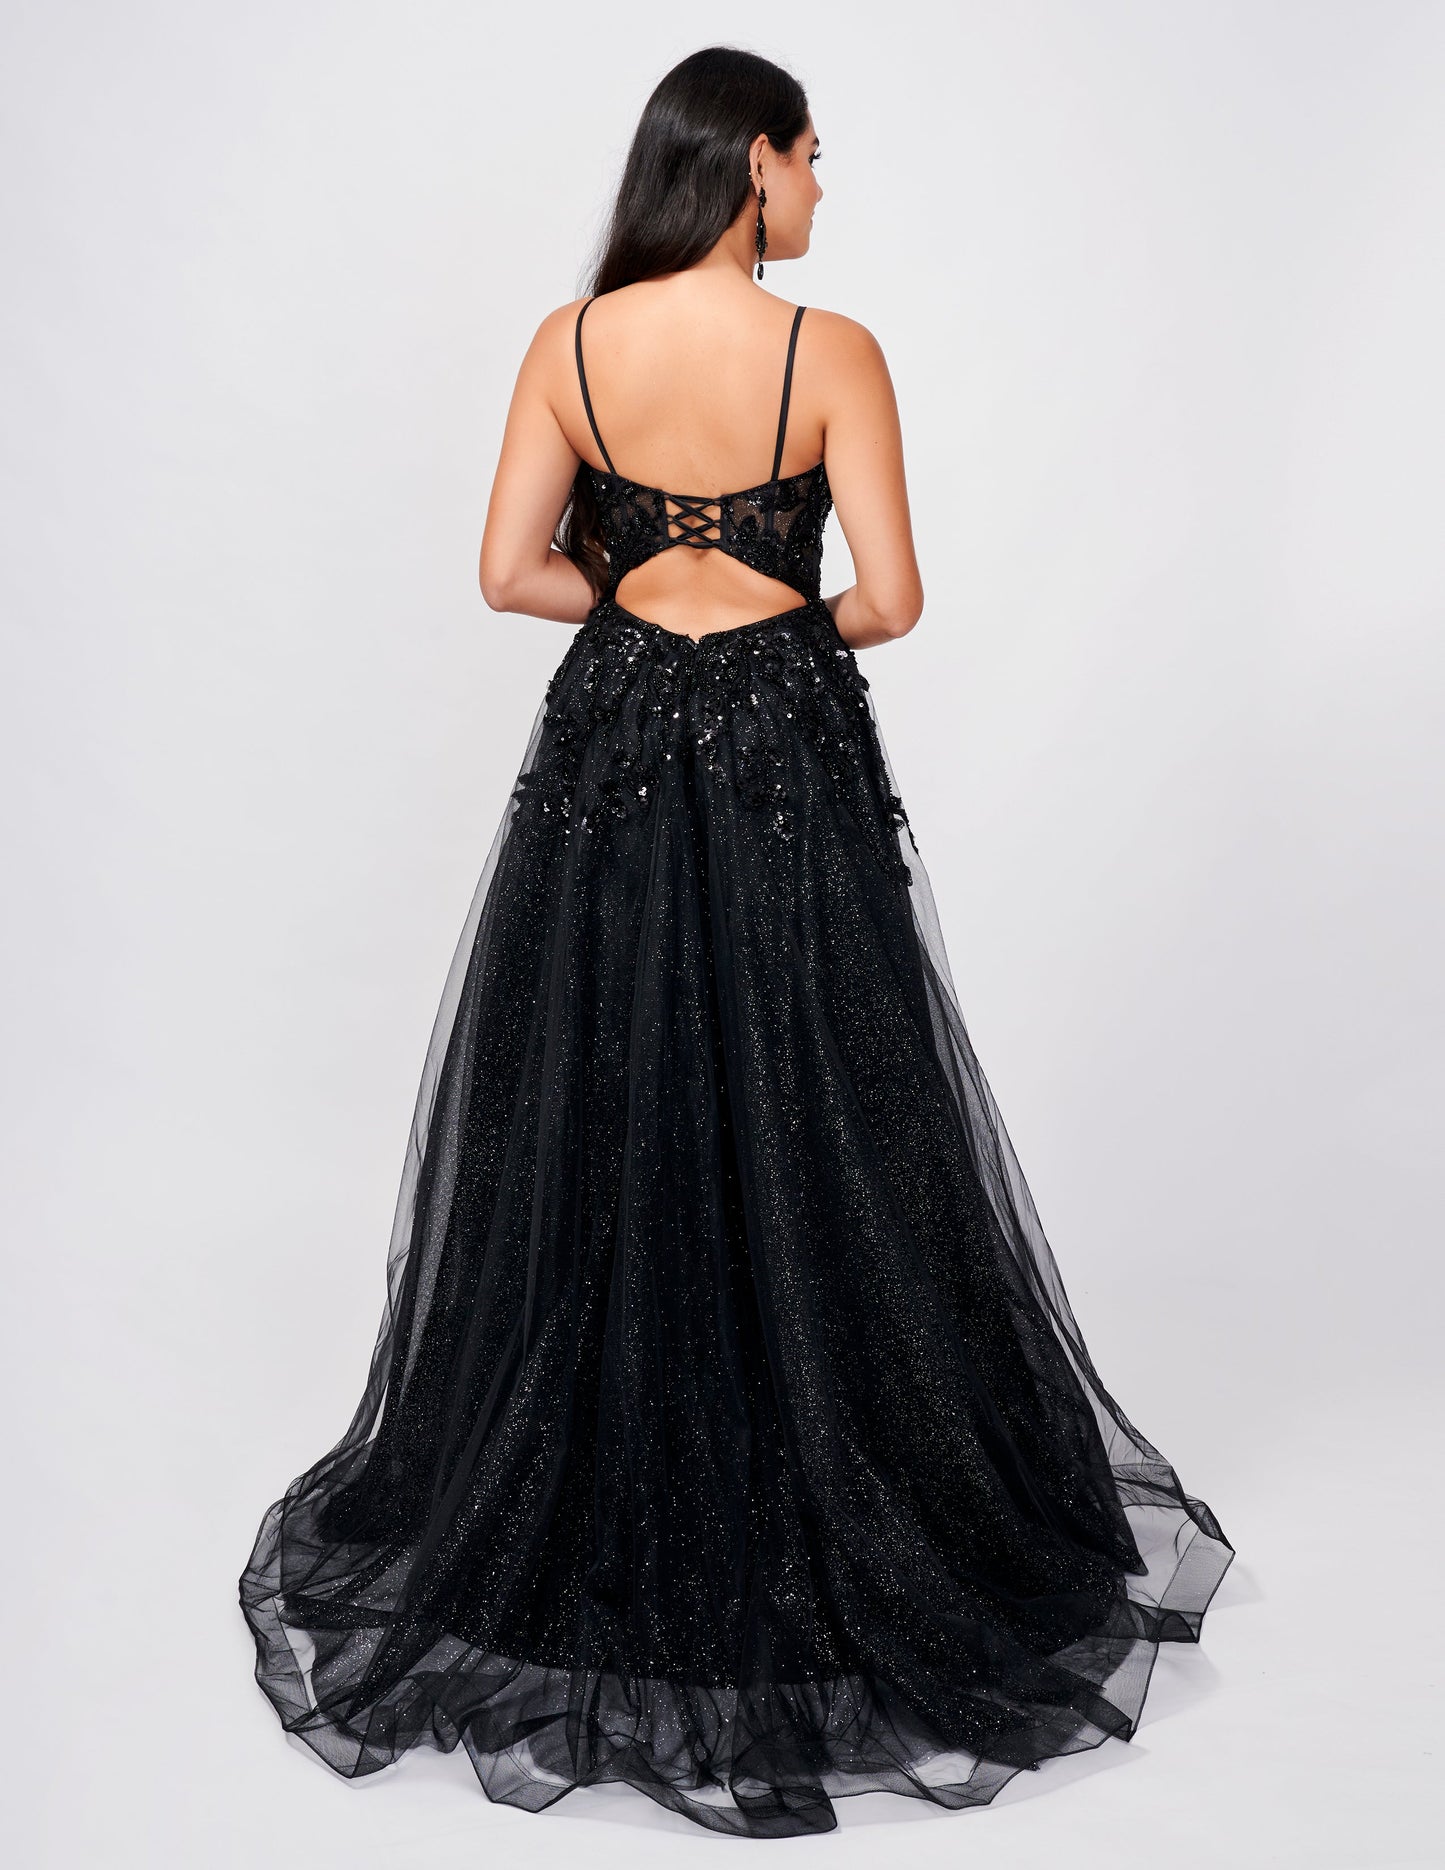 <p data-mce-fragment="1">This stunning Nina Canacci 3262 dress features shimmering tulle, a backless design, and a lace corset with sequins. The A-line maxi silhouette is elevated with a high slit, creating a striking and elegant look. Perfect for prom or any special occasion, this dress is sure to make a statement.</p> <p data-mce-fragment="1">Sizes: 0-14</p> <p data-mce-fragment="1">Colors: Black, Emerald</p>